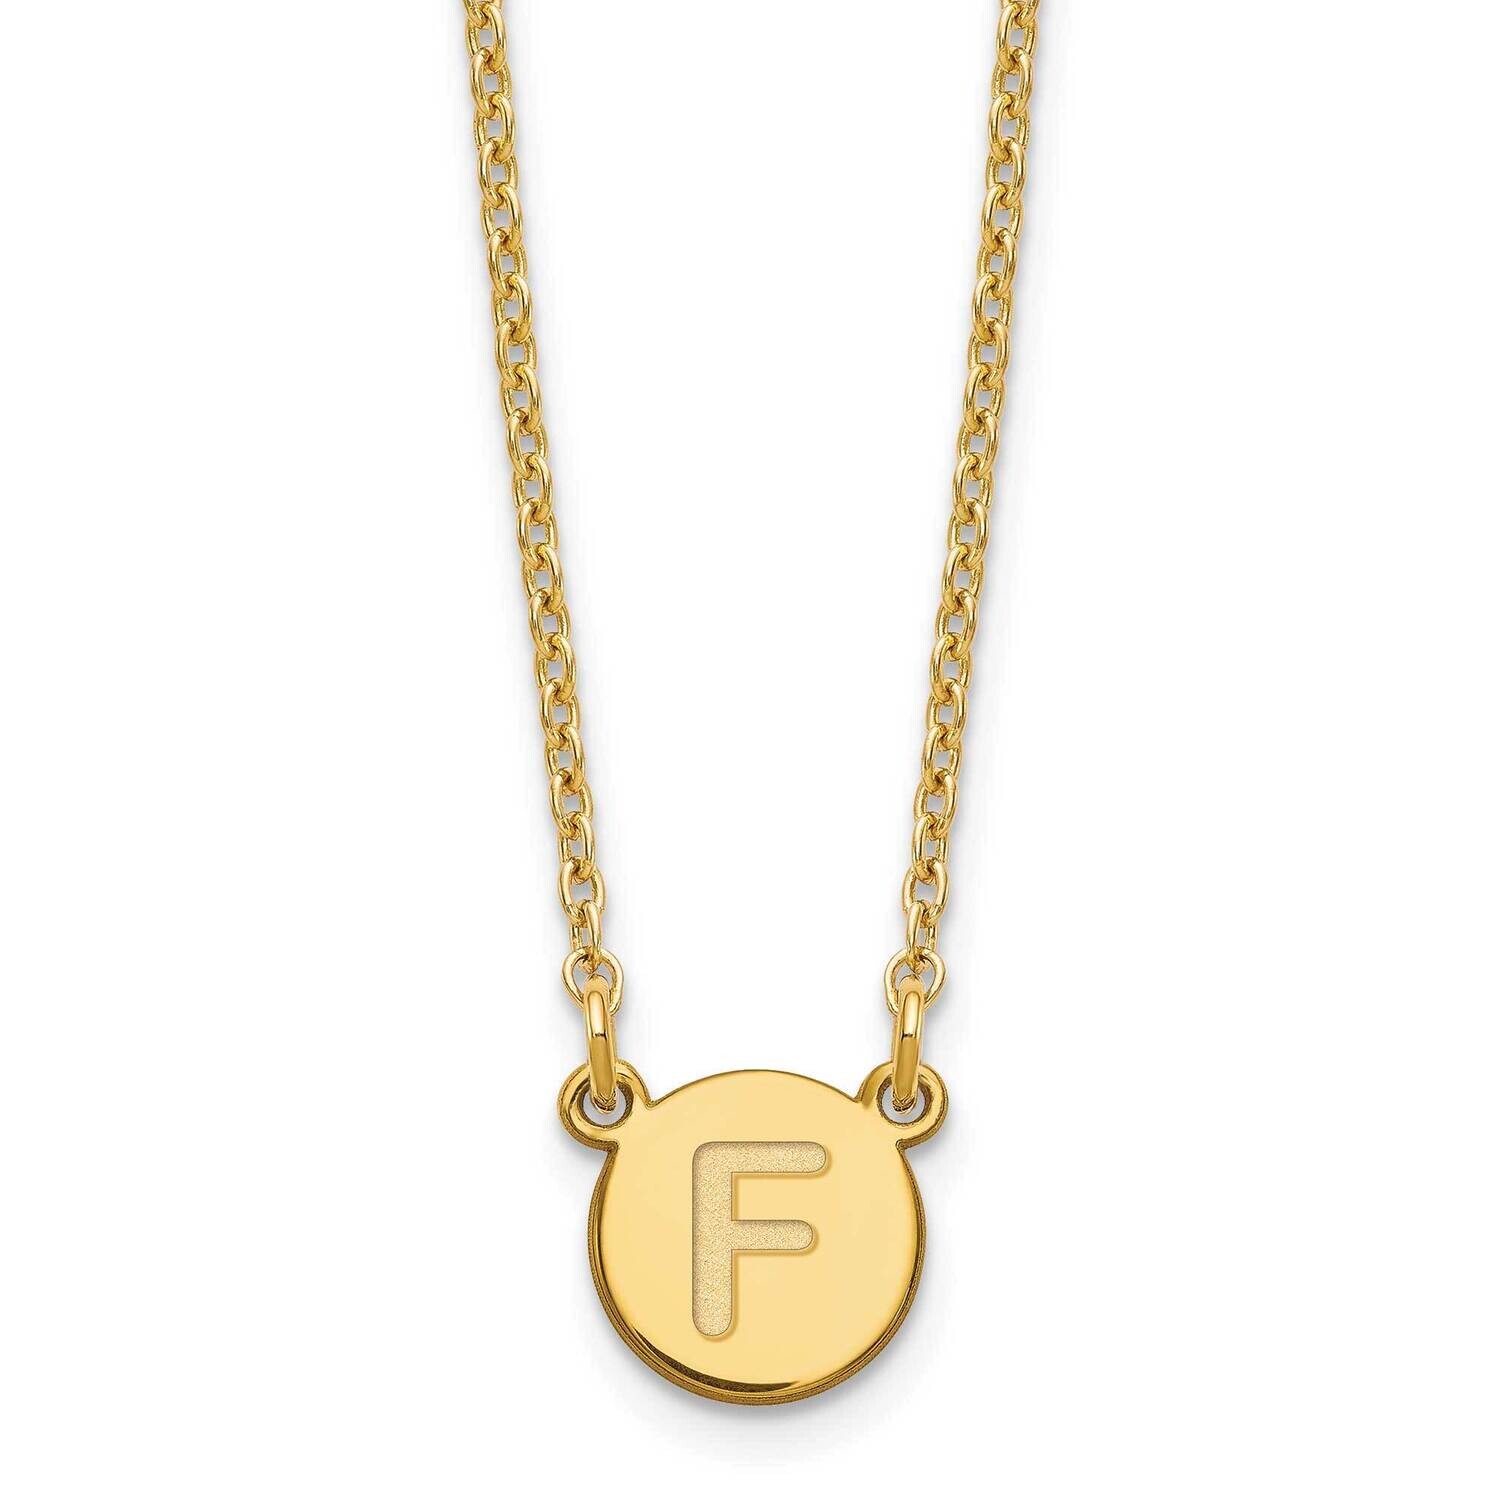 Gold-Plated Tiny Circle Block Letter F Initial Necklace Sterling Silver XNA722GP/F